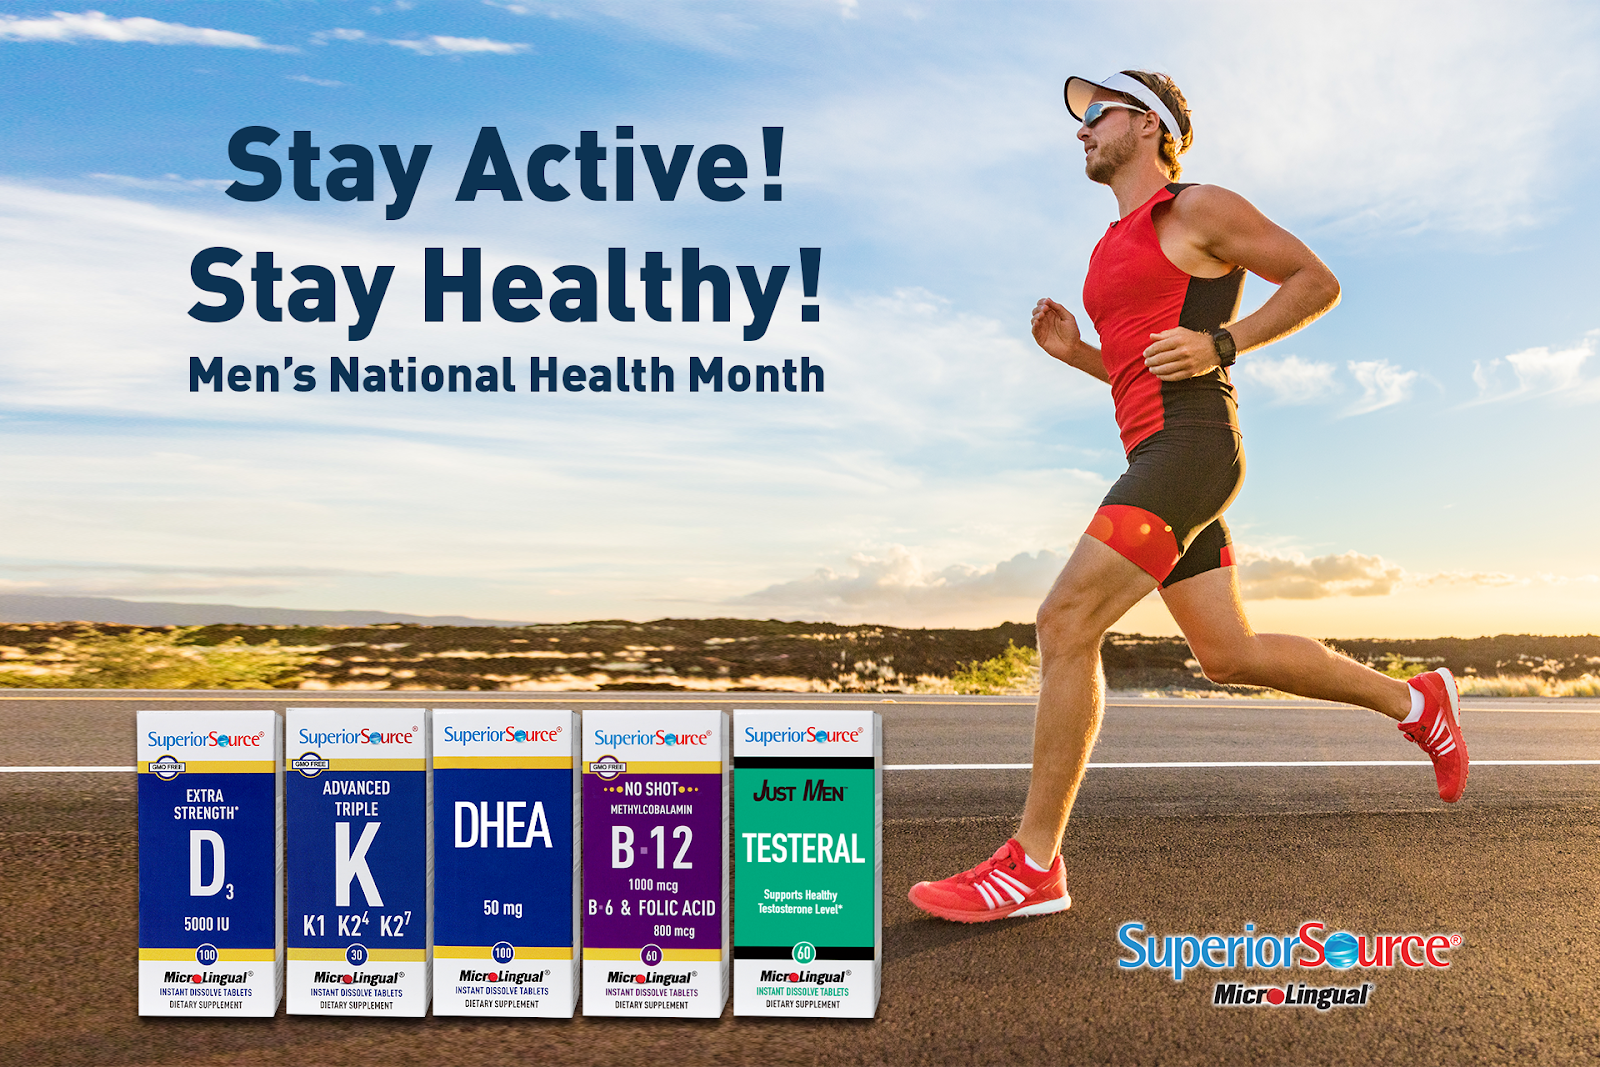 Win health. Stay healthy. Staying healthy. Stay Active. Stay healthy картинка.